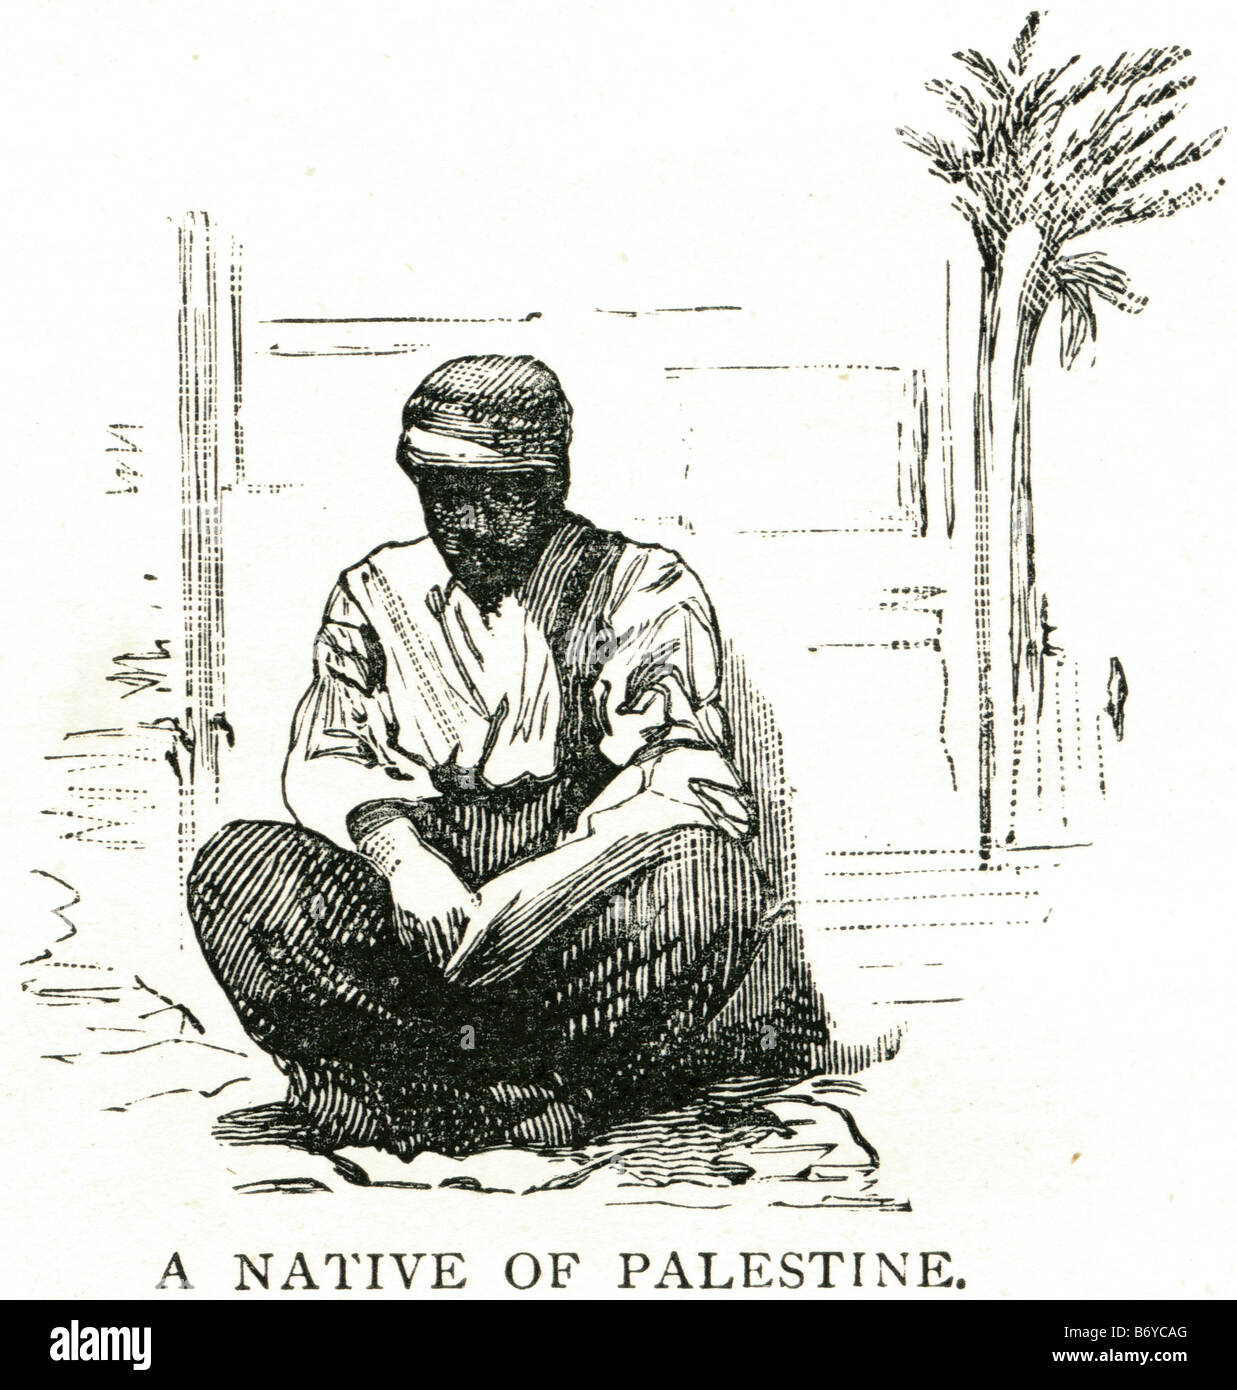 a native of palestine Palestine is a name which has been widely used since Roman times to refer to the region between the Medite Stock Photo